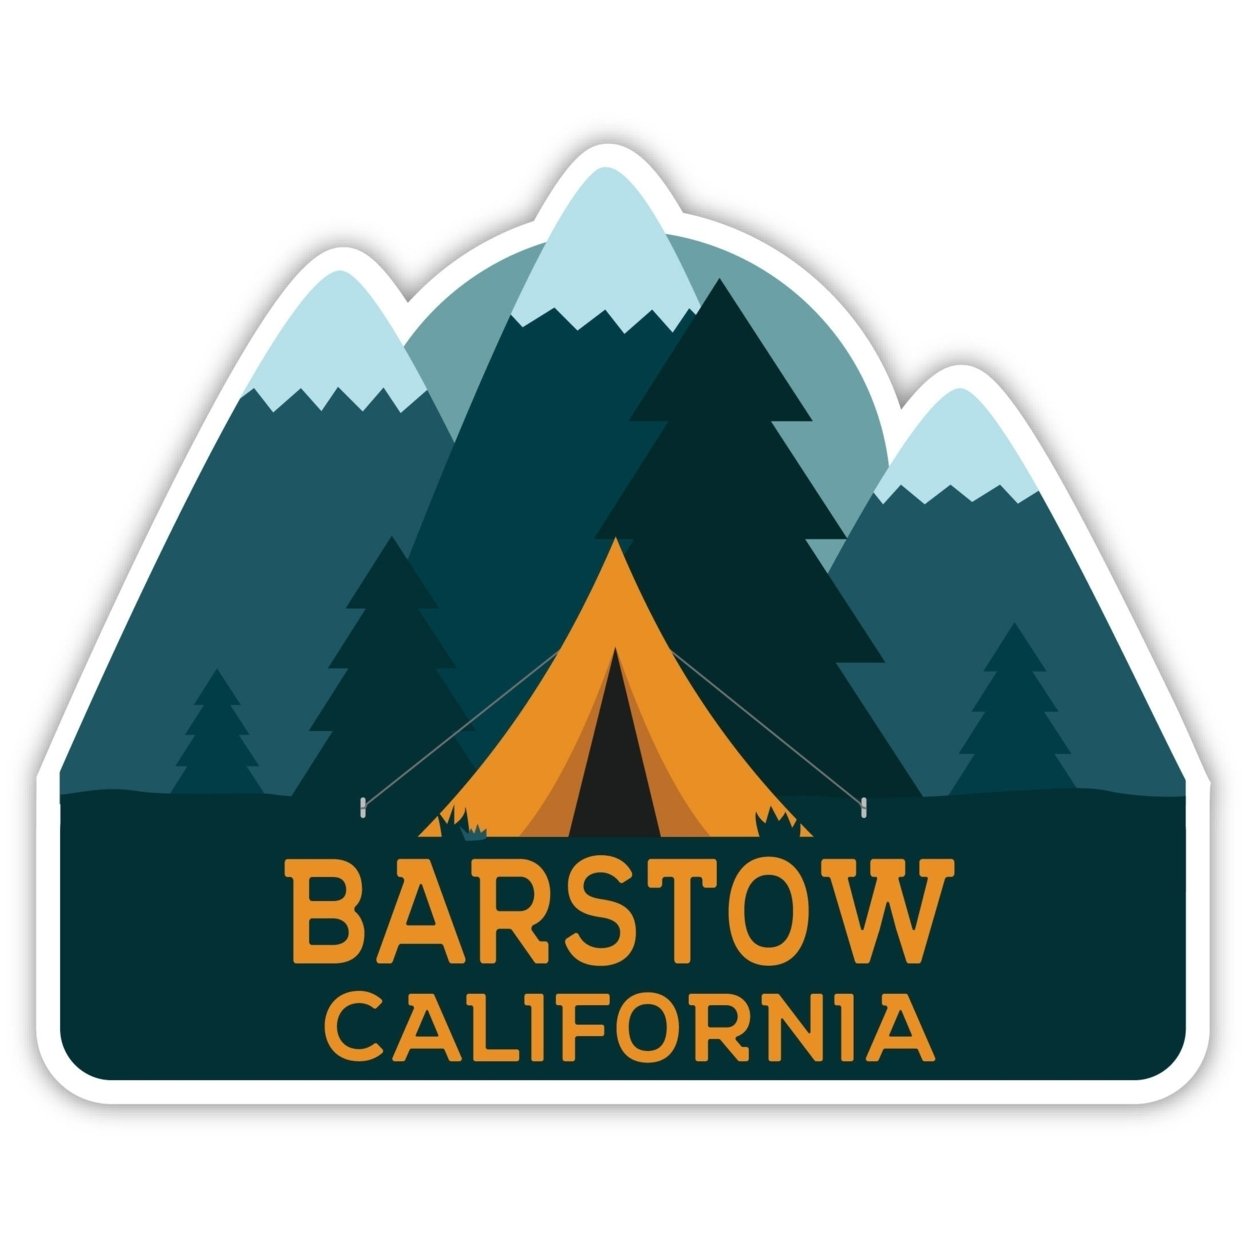 Barstow California Souvenir Decorative Stickers (Choose Theme And Size) - Single Unit, 4-Inch, Adventures Awaits